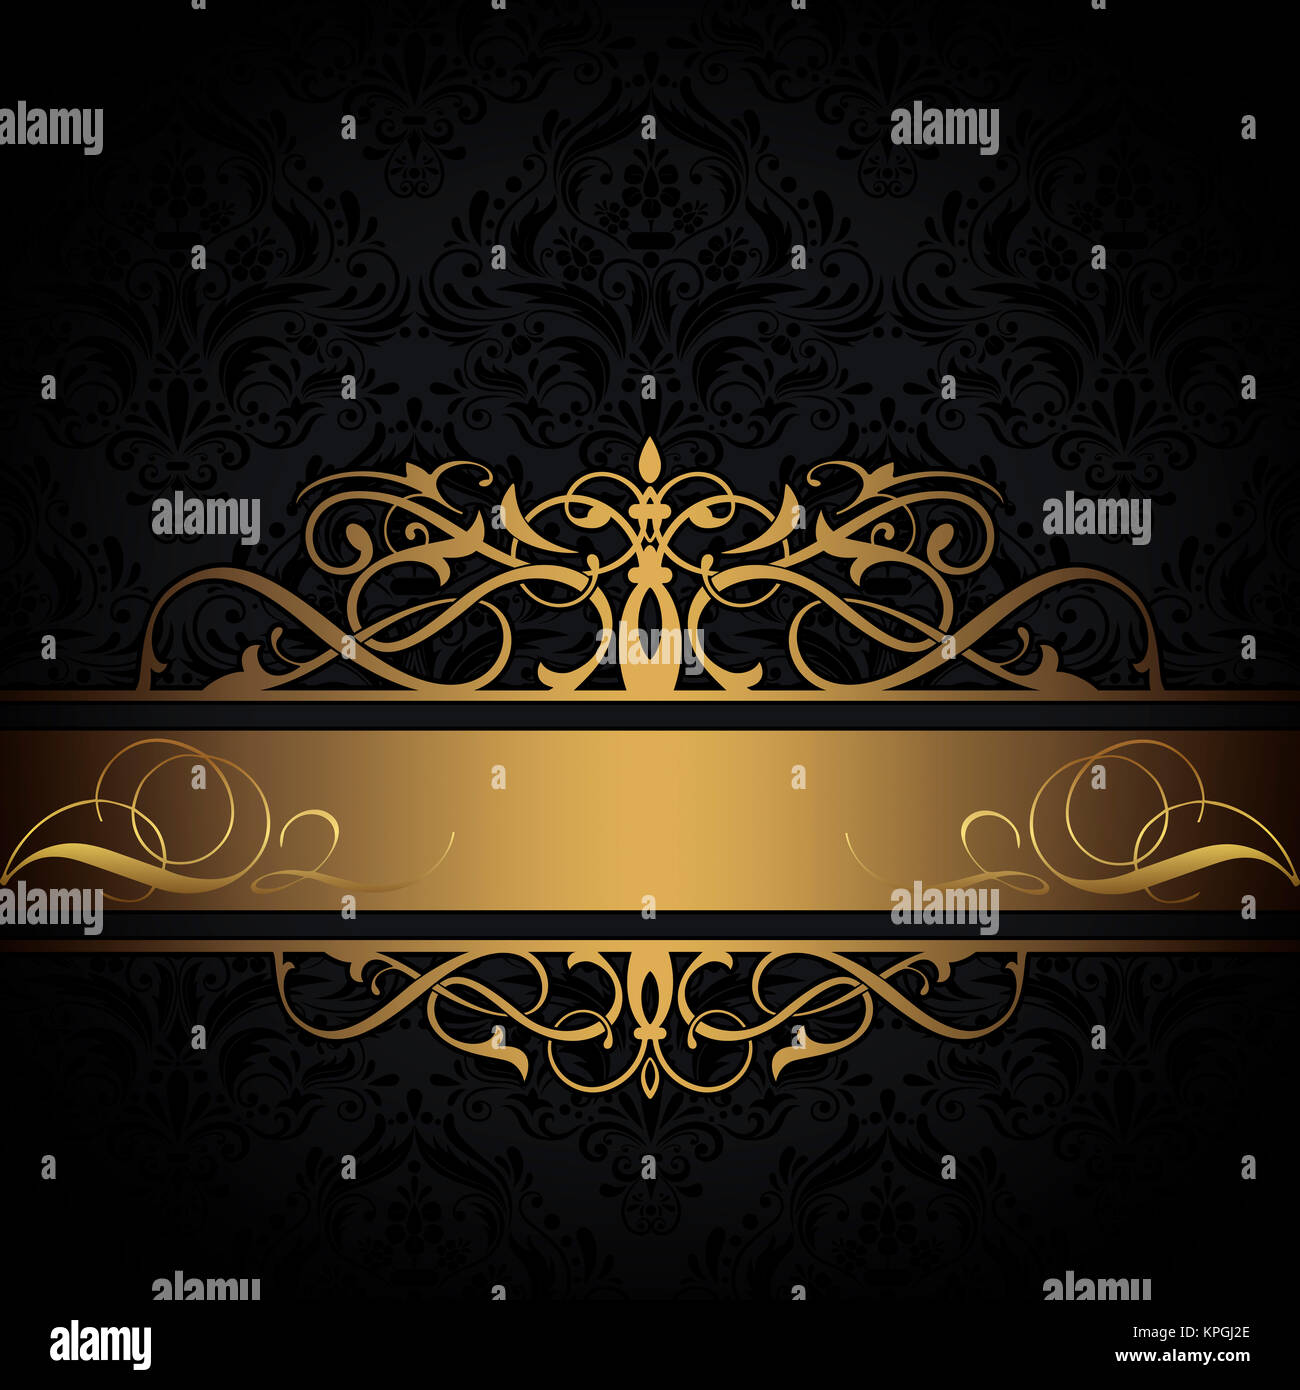 Black background with decorative old-fashioned patterns and elegant gold  border Stock Photo - Alamy